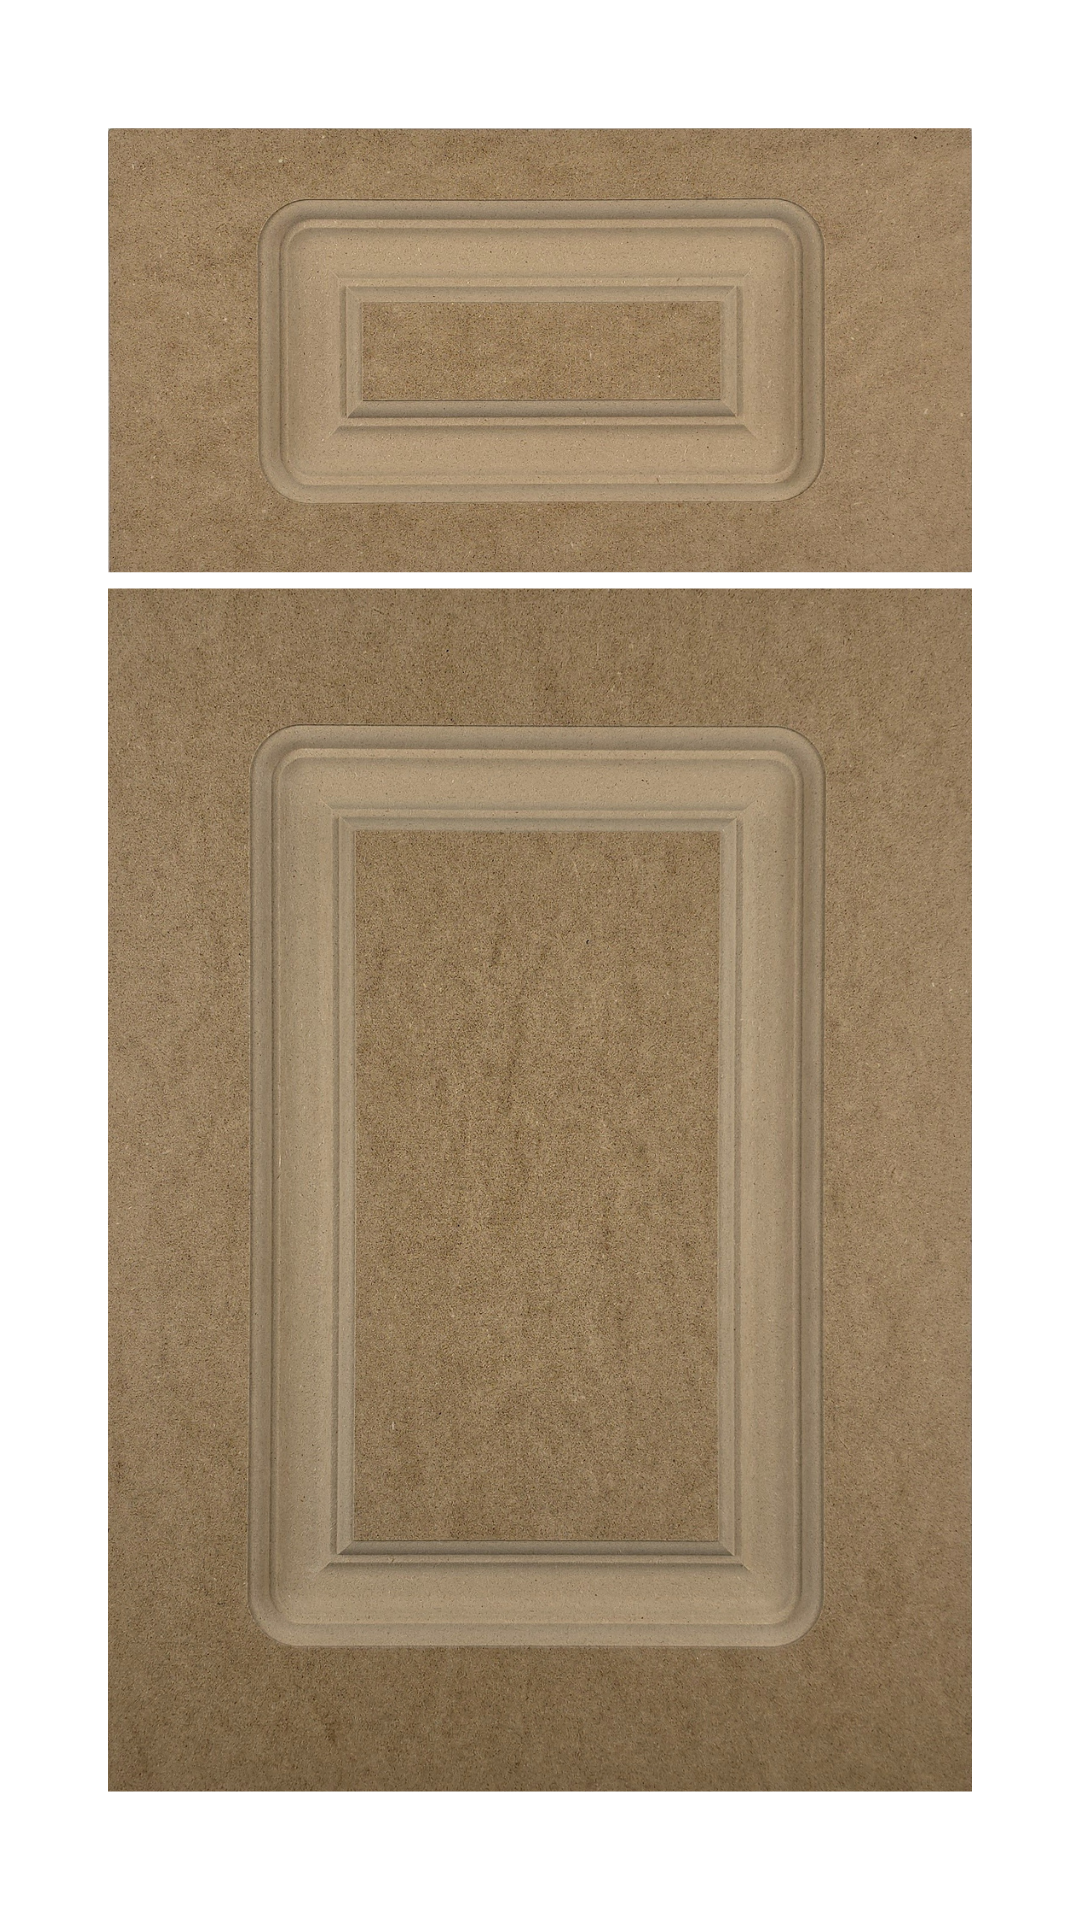 The Cooper cabinet door has a raised panel, deep 3 step u-shaped groove, and round corners.